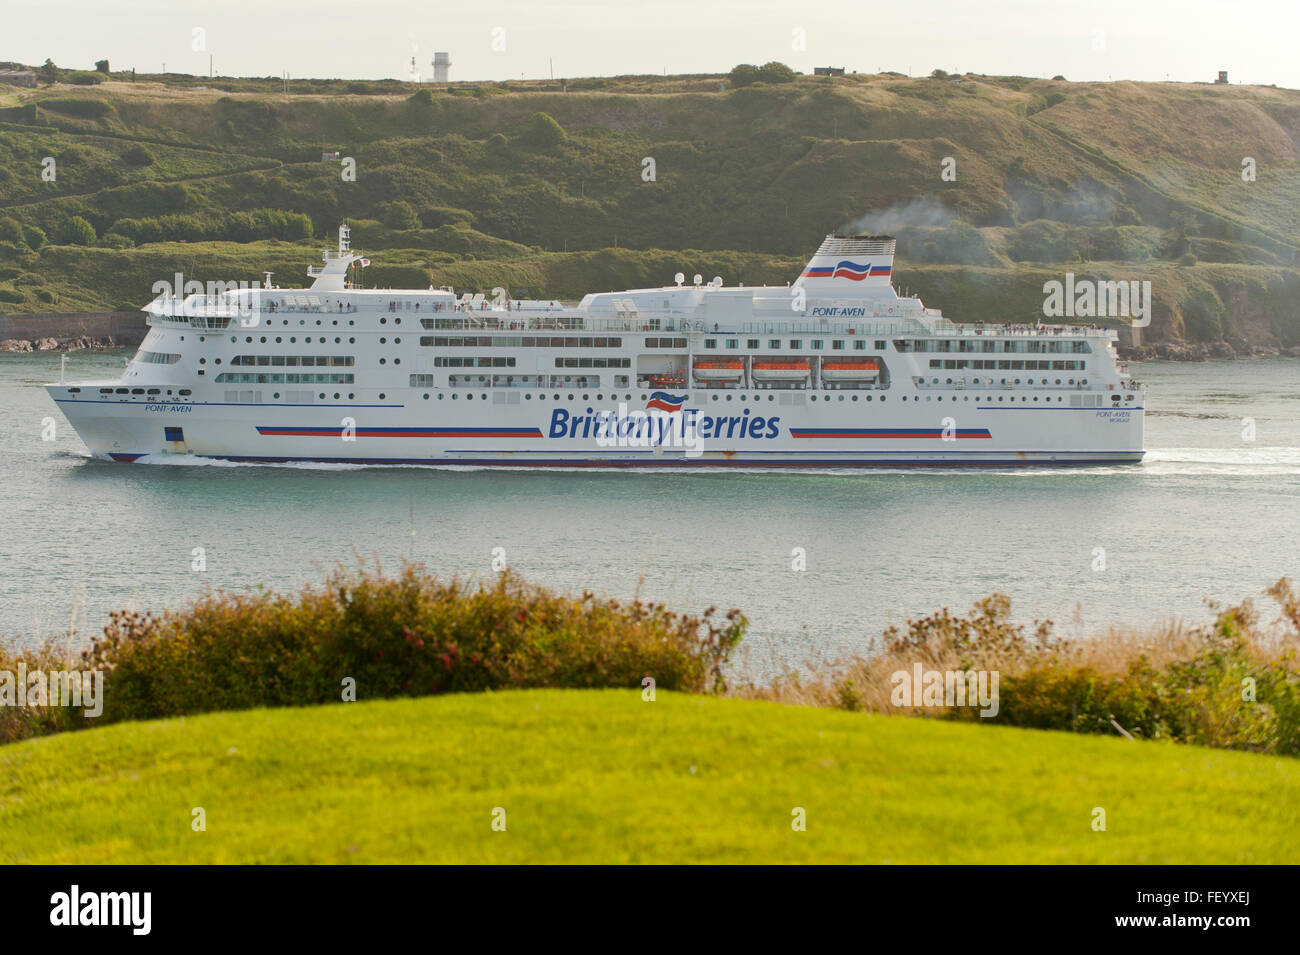 Brittany Ferries 'Pont Aven' passes Fort Camden heading for Ringaskiddy, Cork, Ireland having sailed from Roscoff, France. Stock Photo